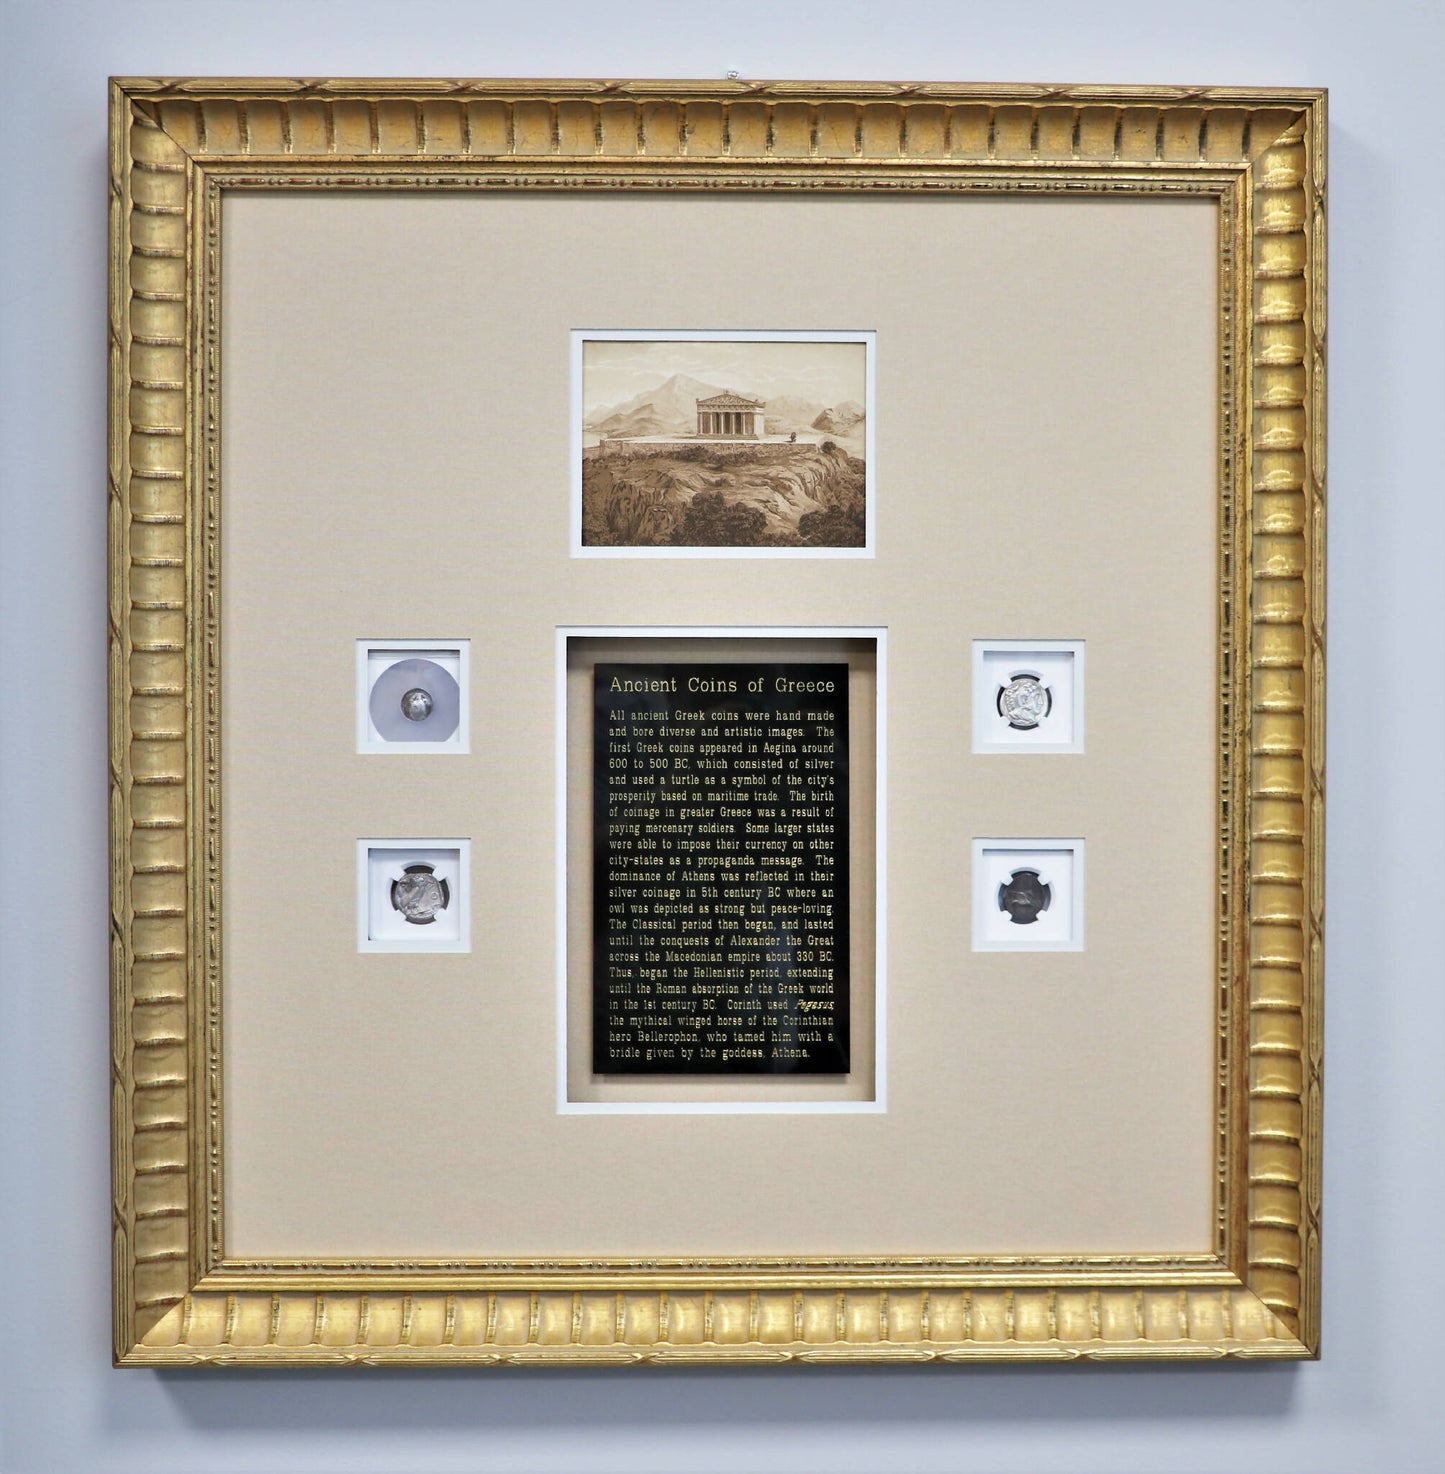 Ancient Coins of the Greek Empire - Museum Framed